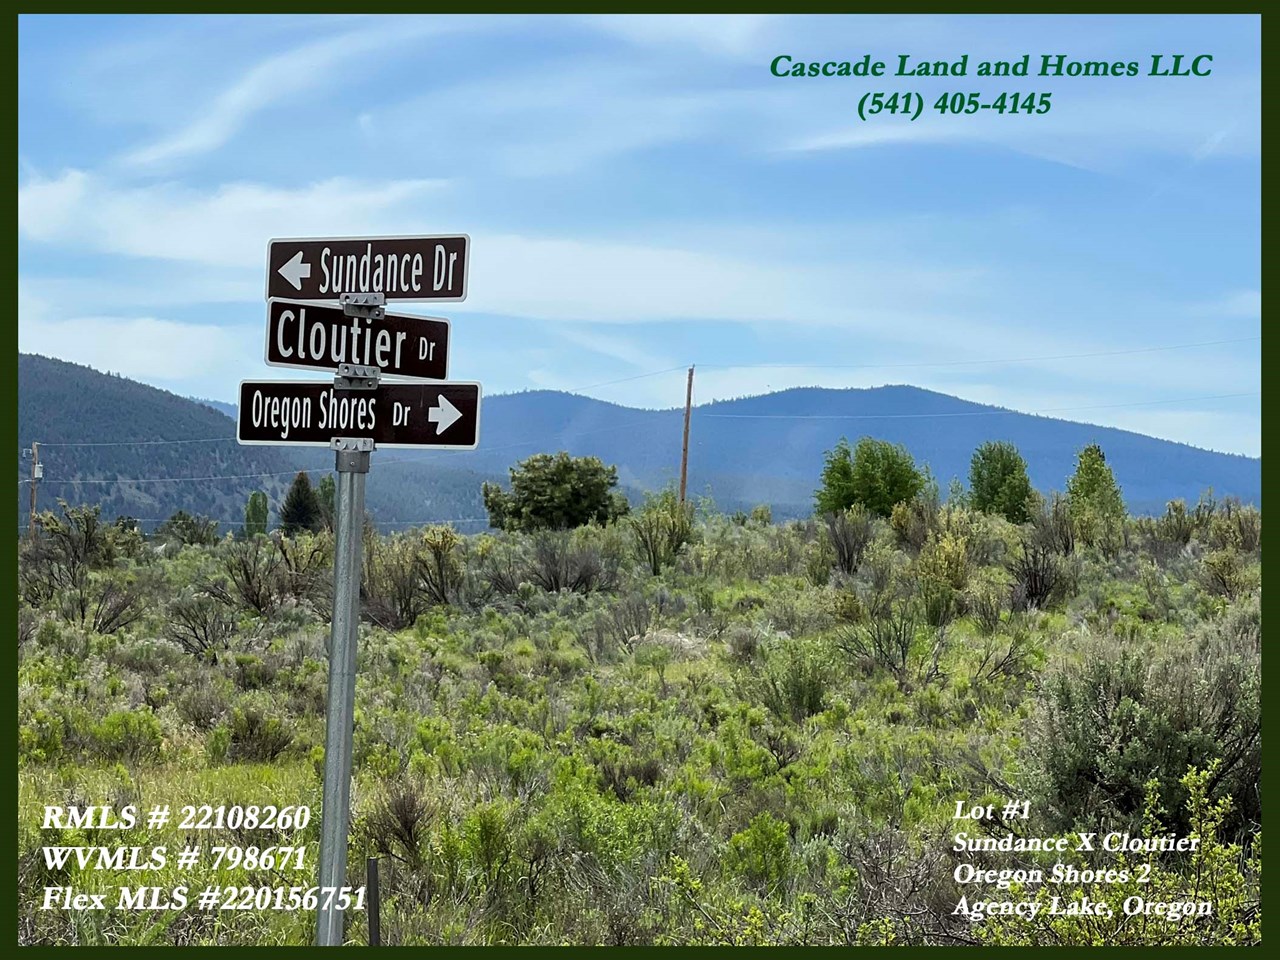 this is a perfect place for your new home if you want to be away from the city, be surrounded by wilderness, have unlimited outdoor recreational opportunities, and still live in a community with maintained roads and a few neighbors.